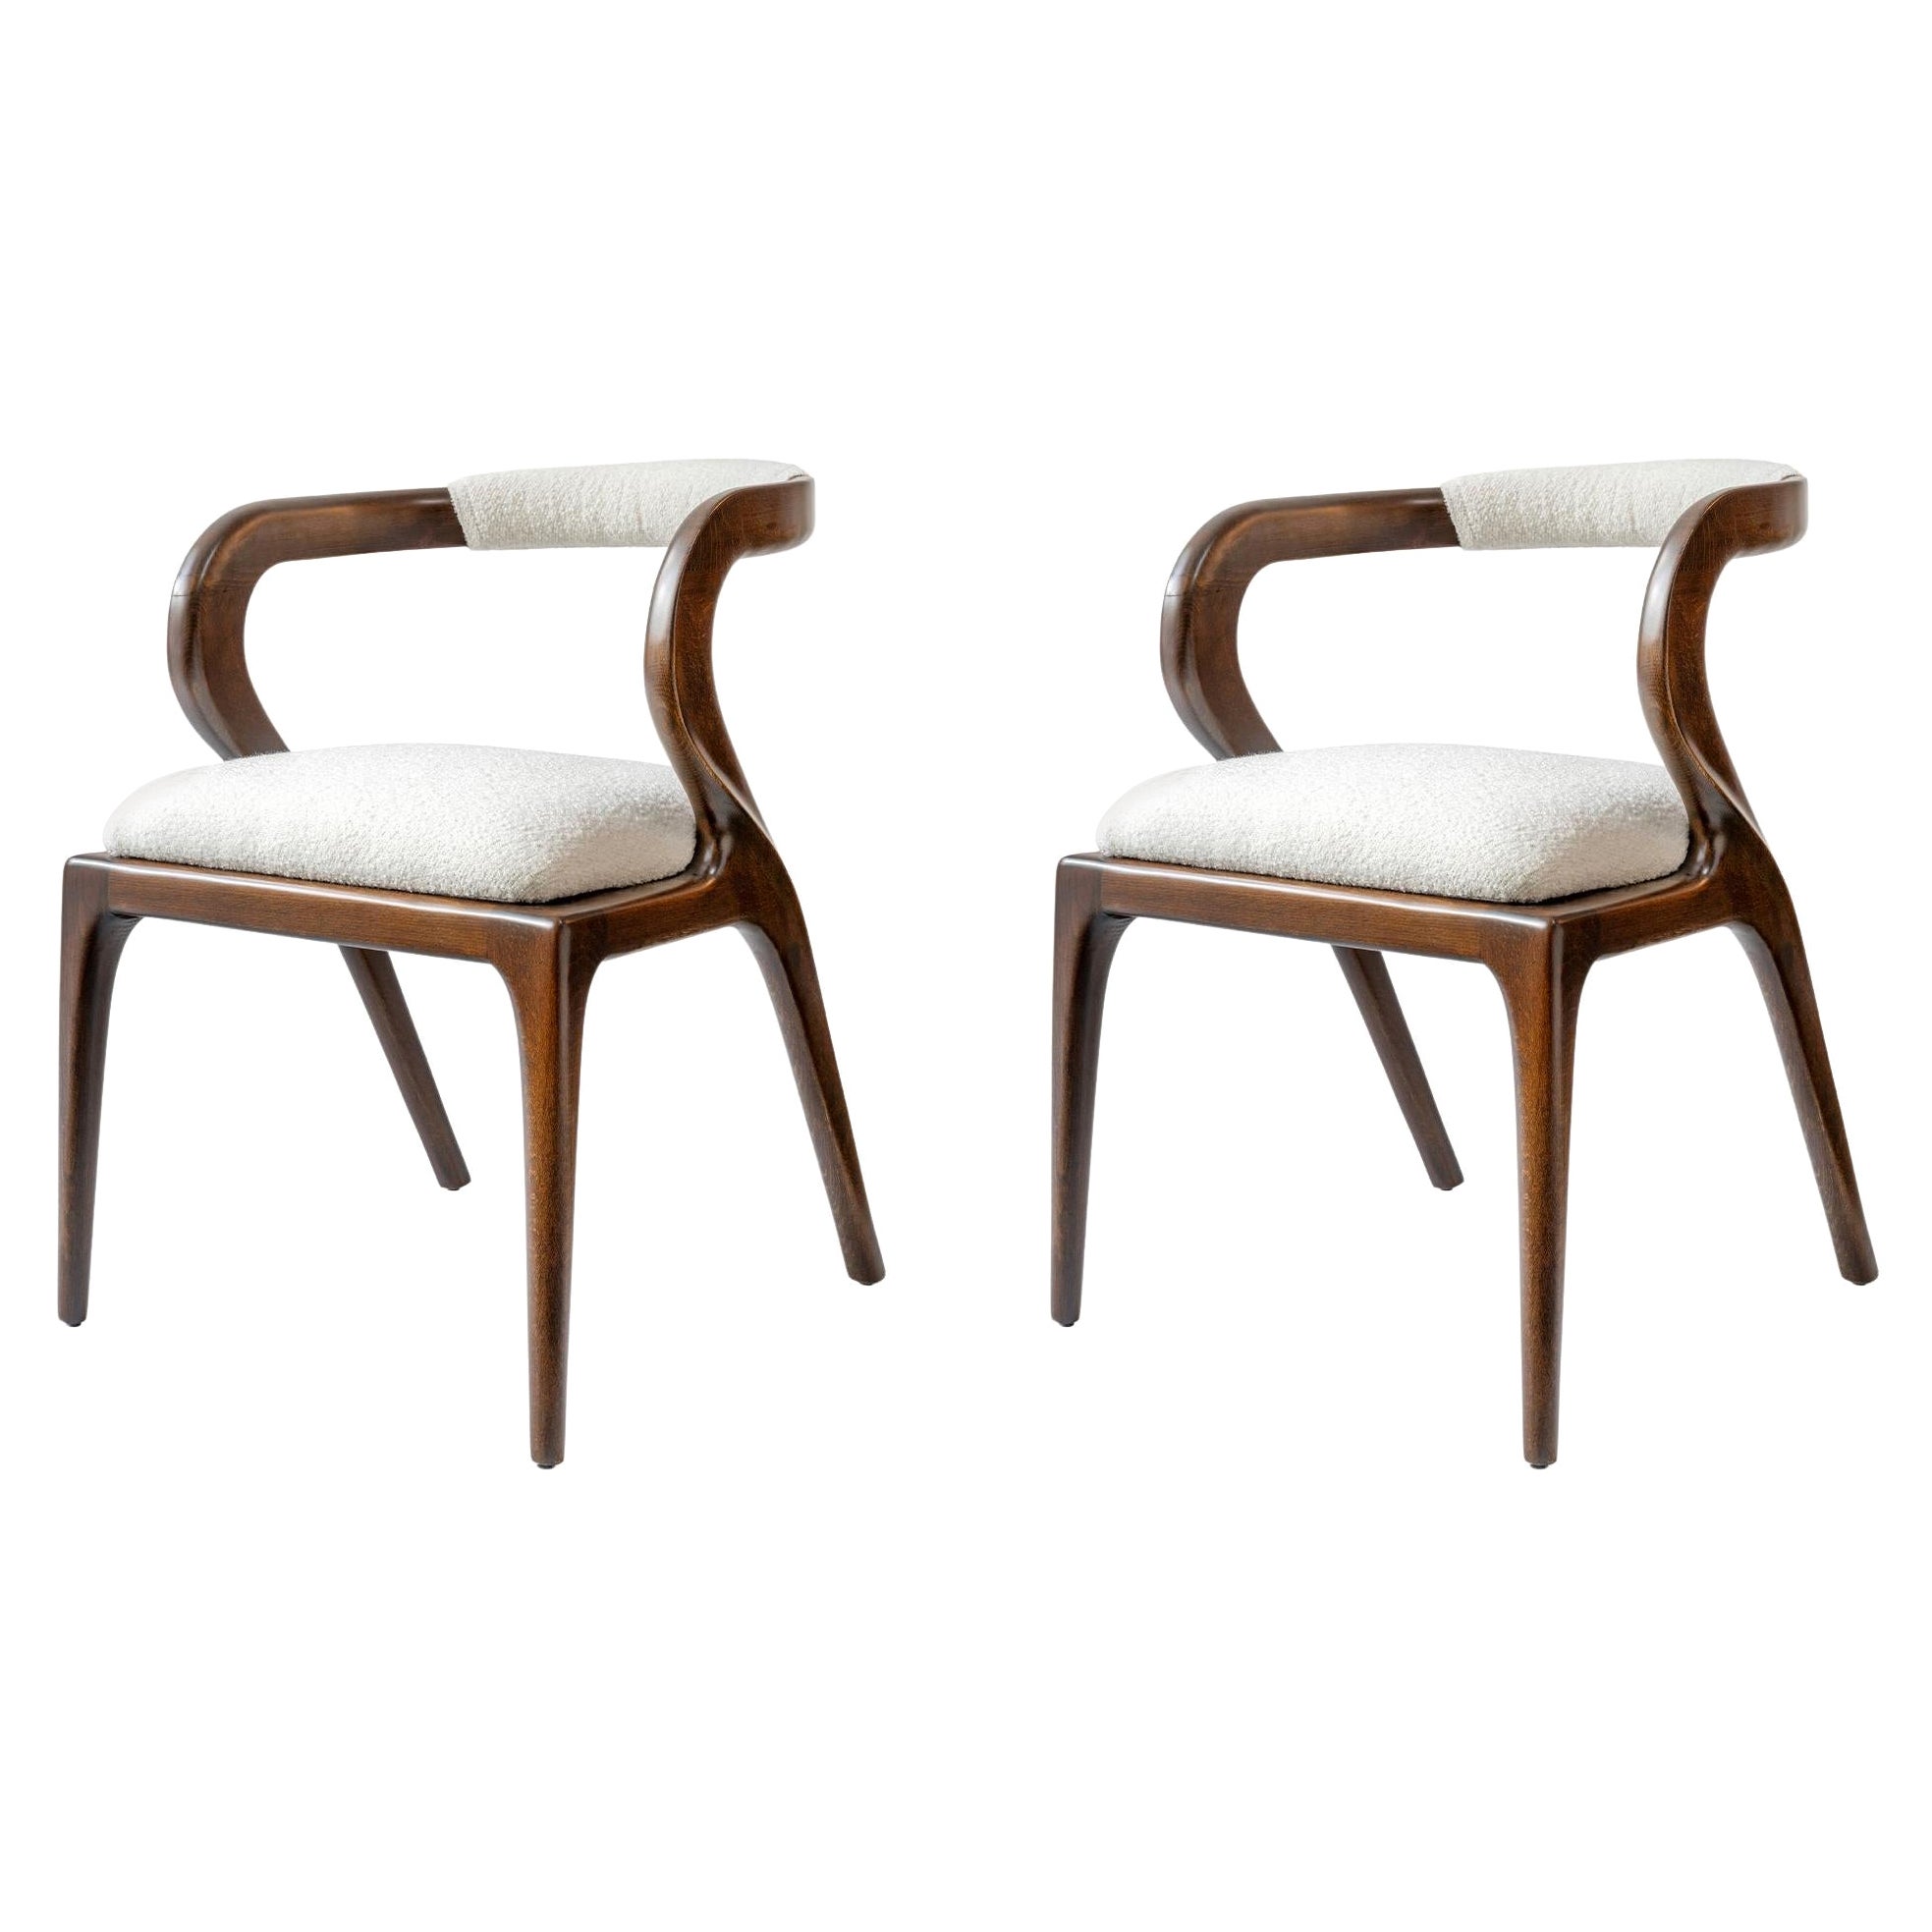 Set of 2, Nana Wooden Dining Chair with Back Detail, No:2 For Sale